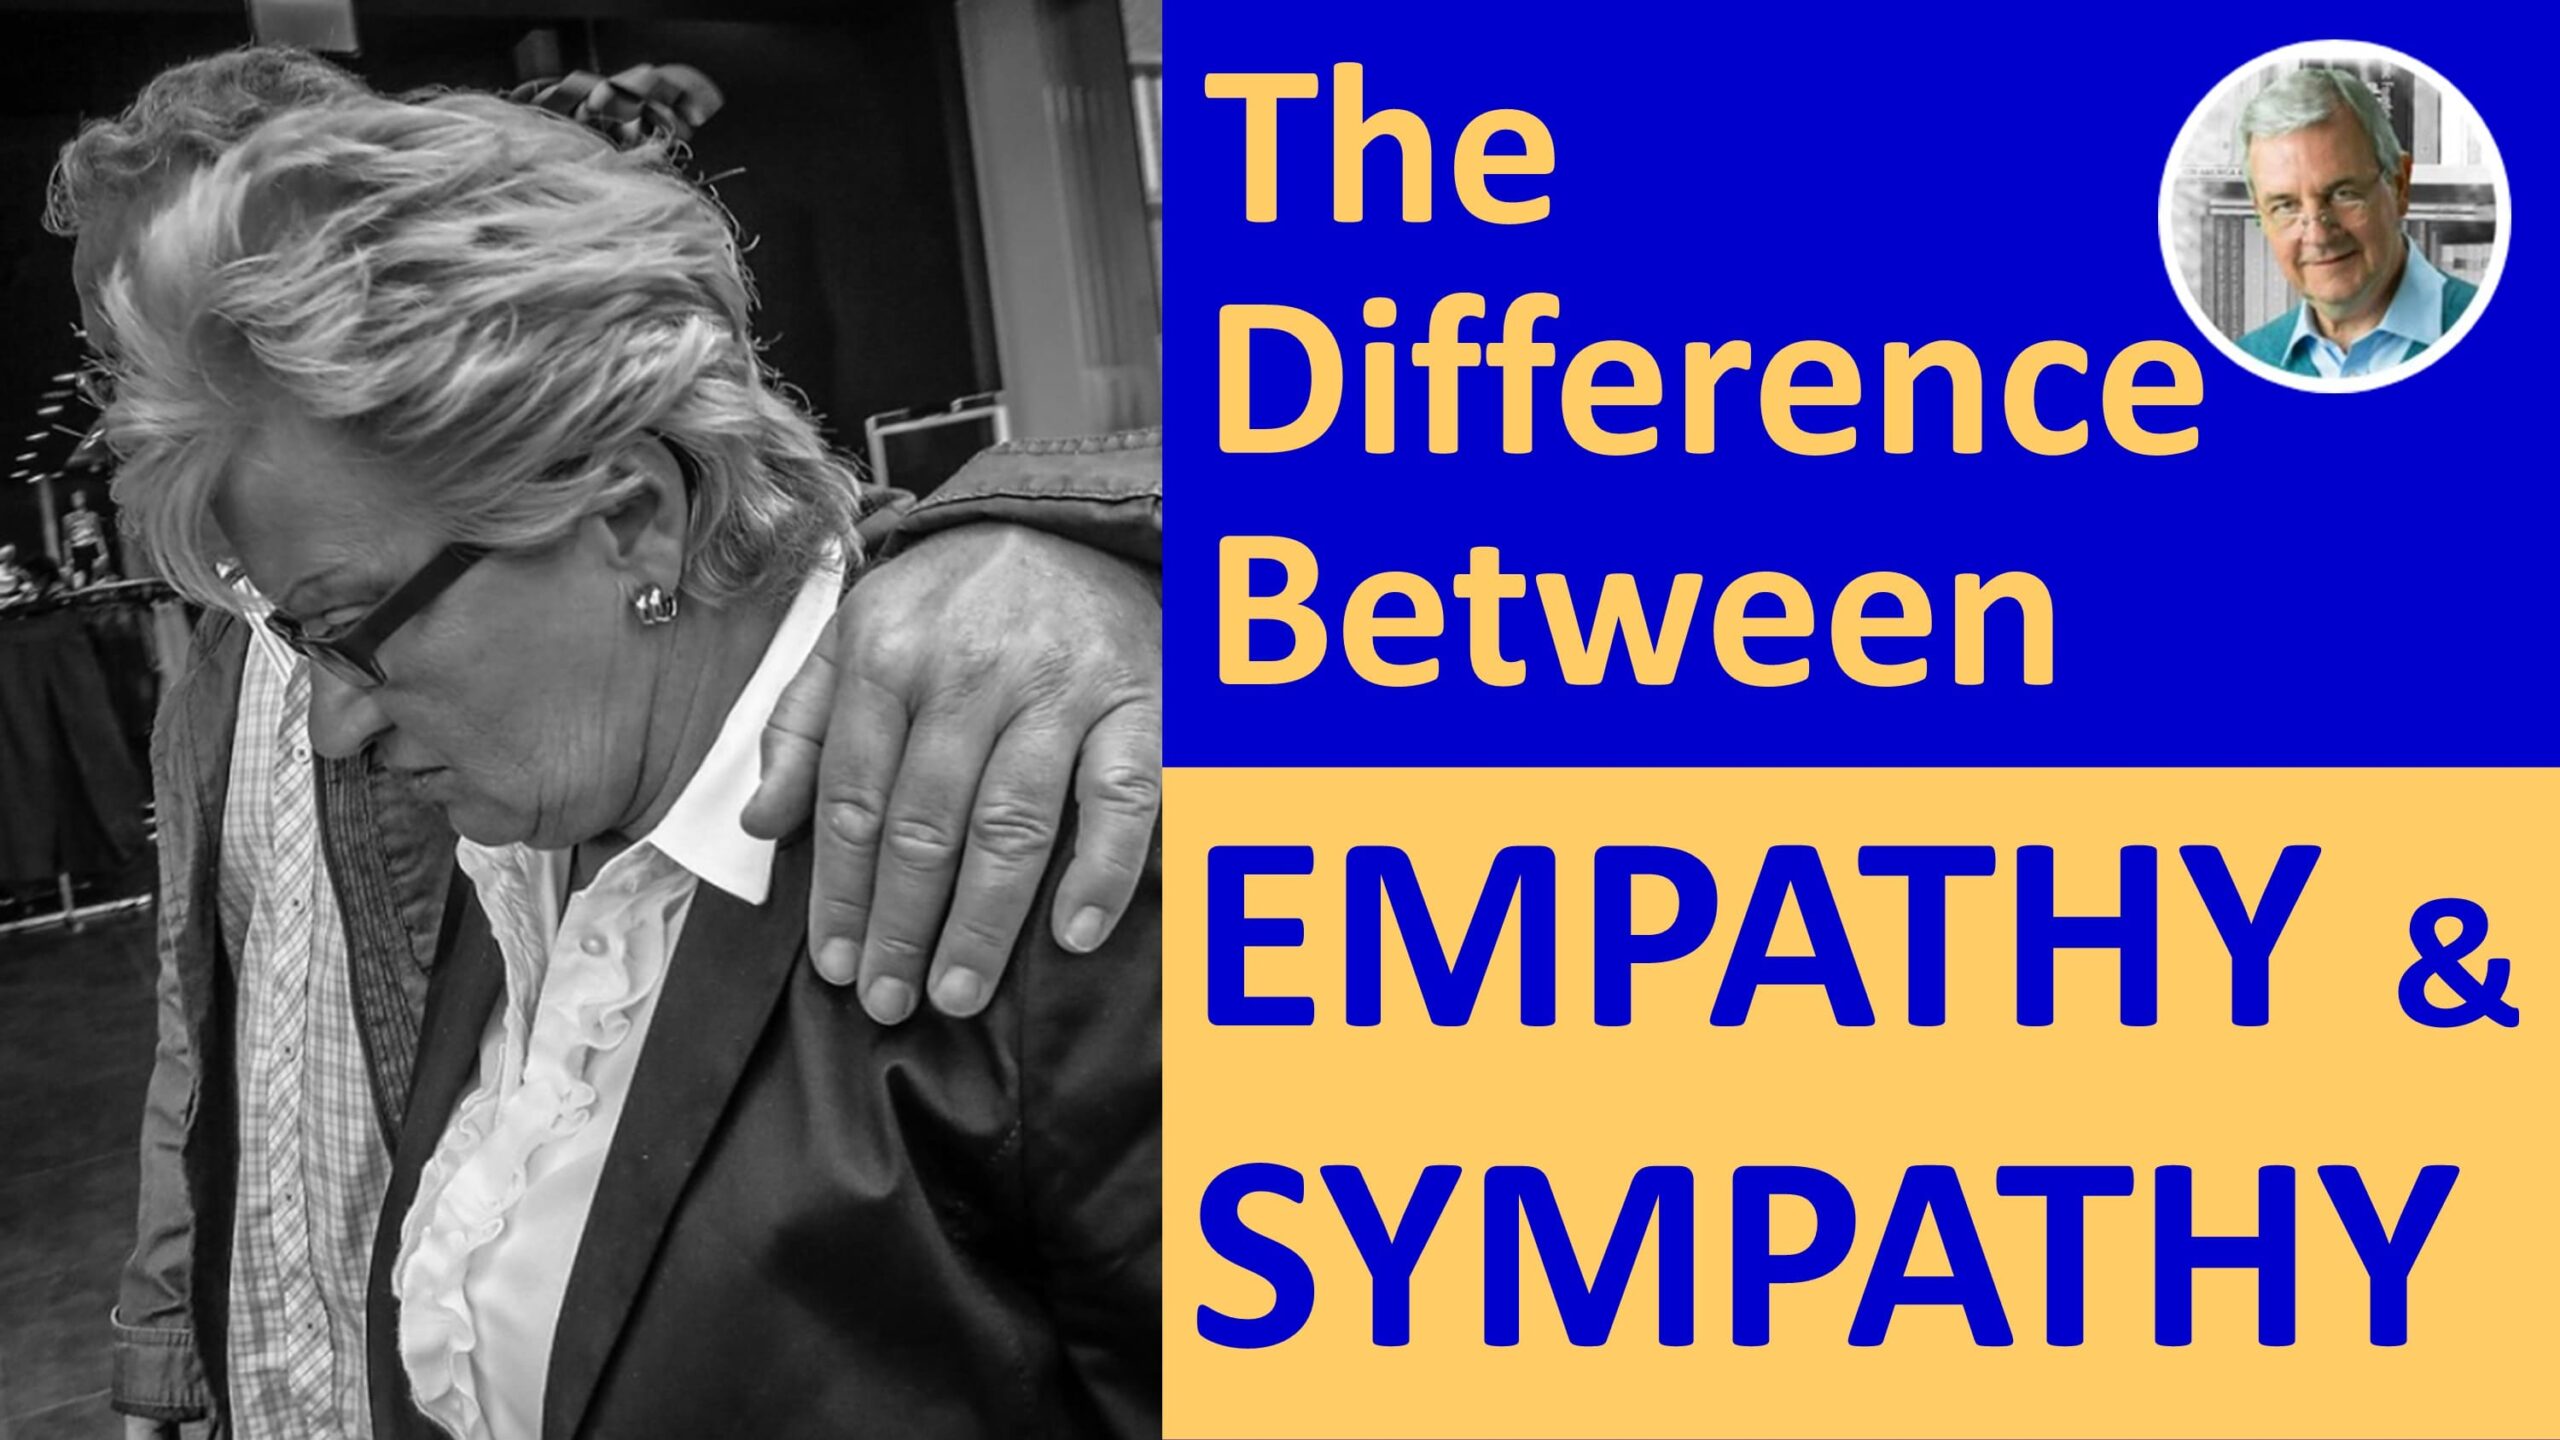 EMPATHY vs SYMPATHY - What's the Difference?